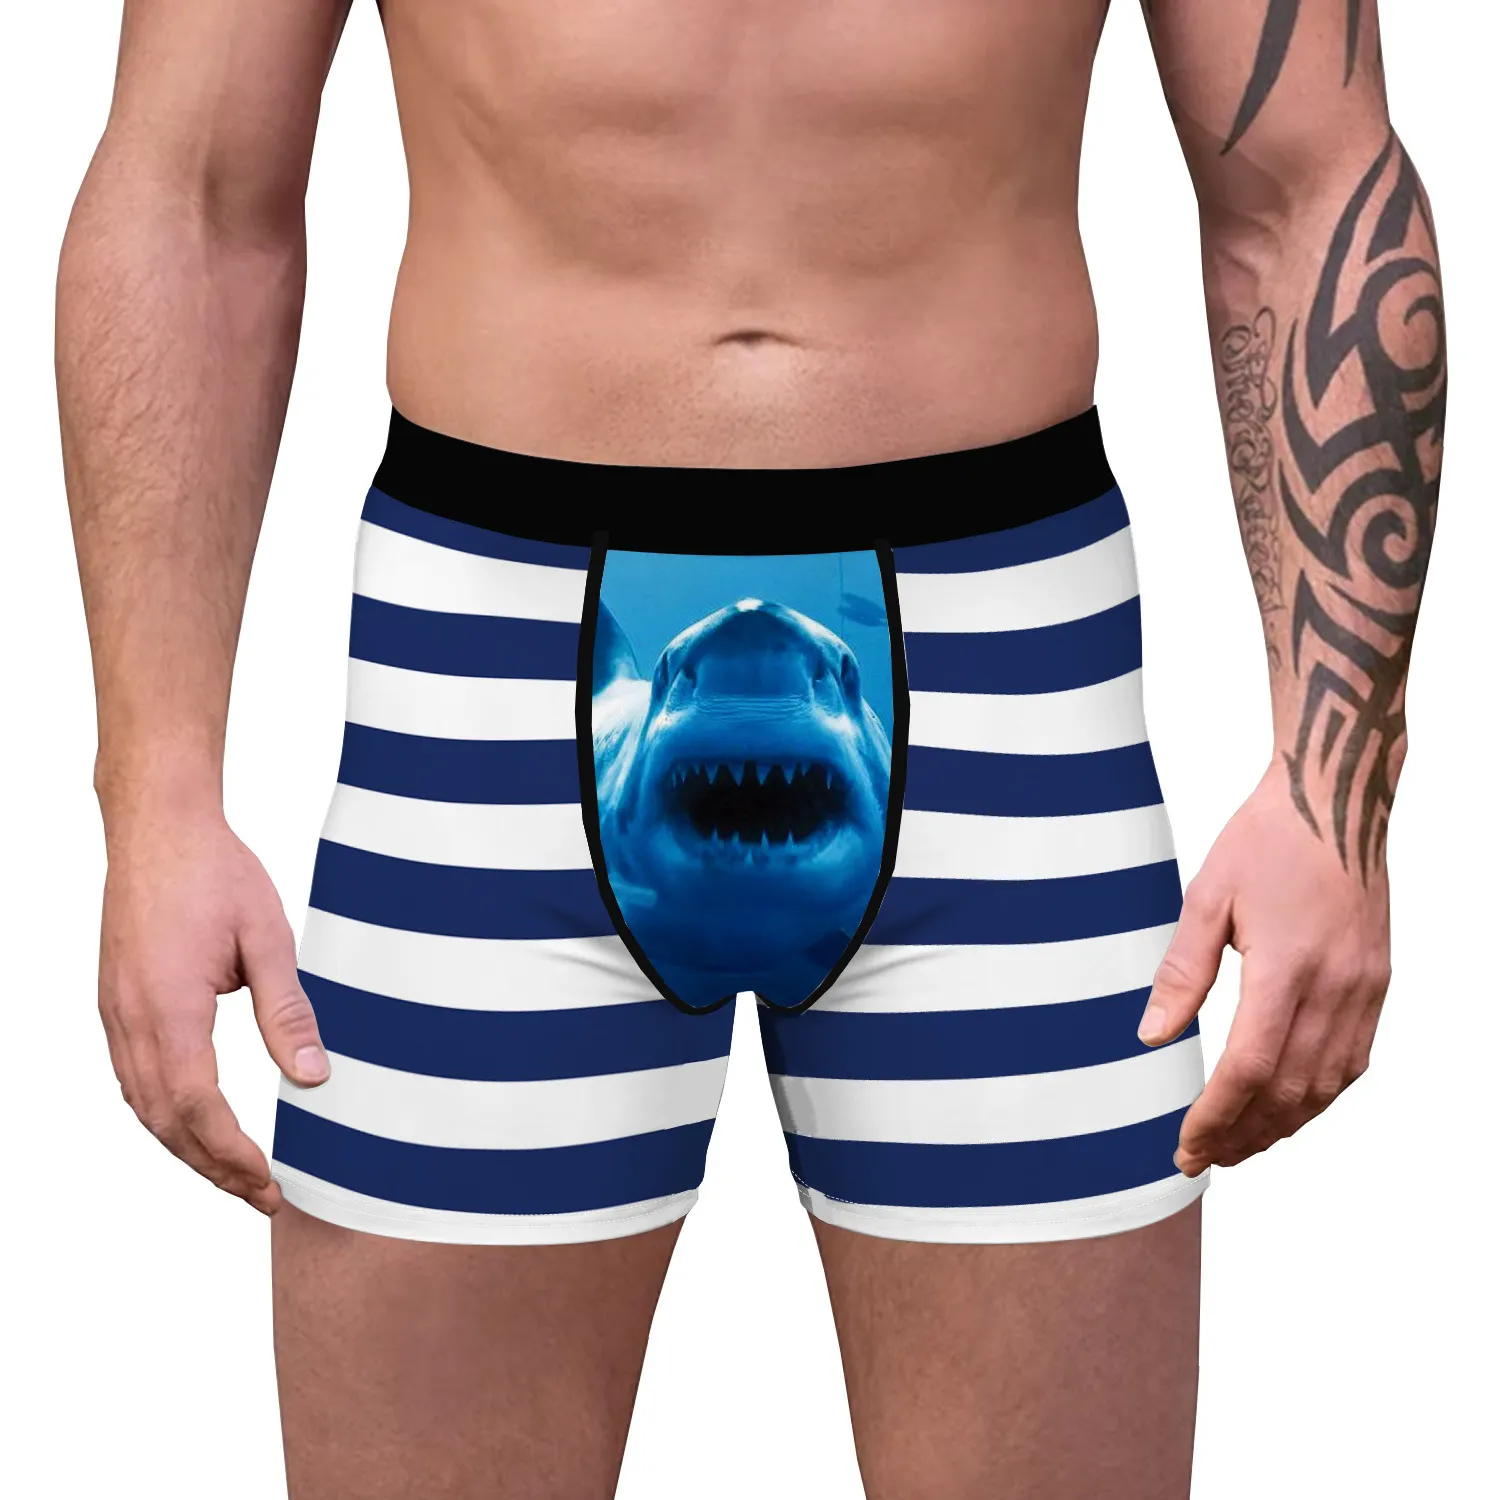 High Quality Customized Shark Printed Long Leg Polyester Men's Trunks Underwear Boxer Briefs With Ball Pouch